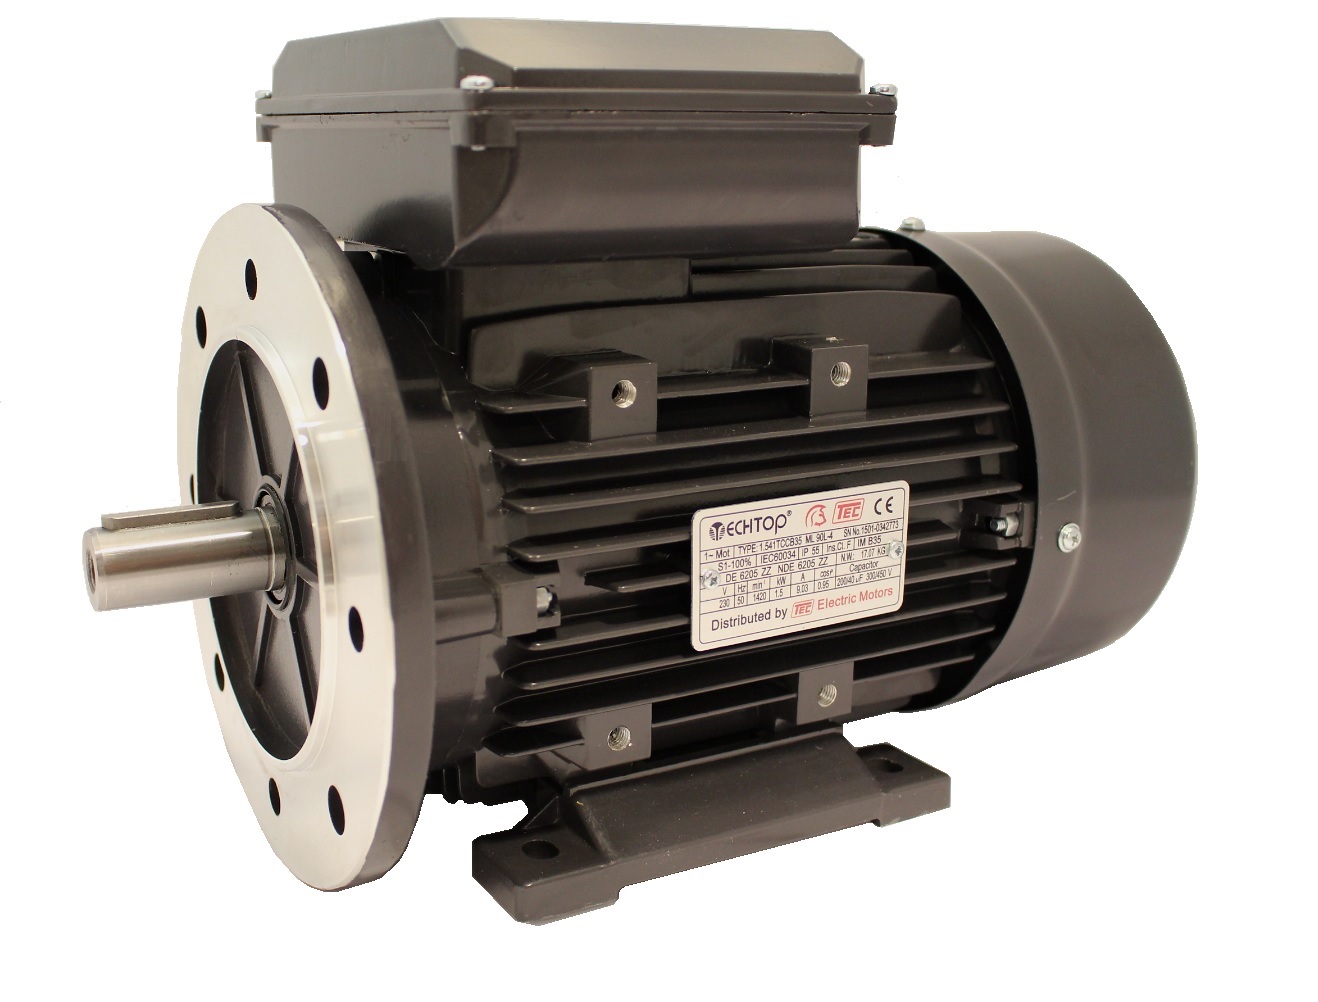 Single Phase 230v Electric Motor, 2.2Kw 2 pole 2850rpm with flange and foot mount